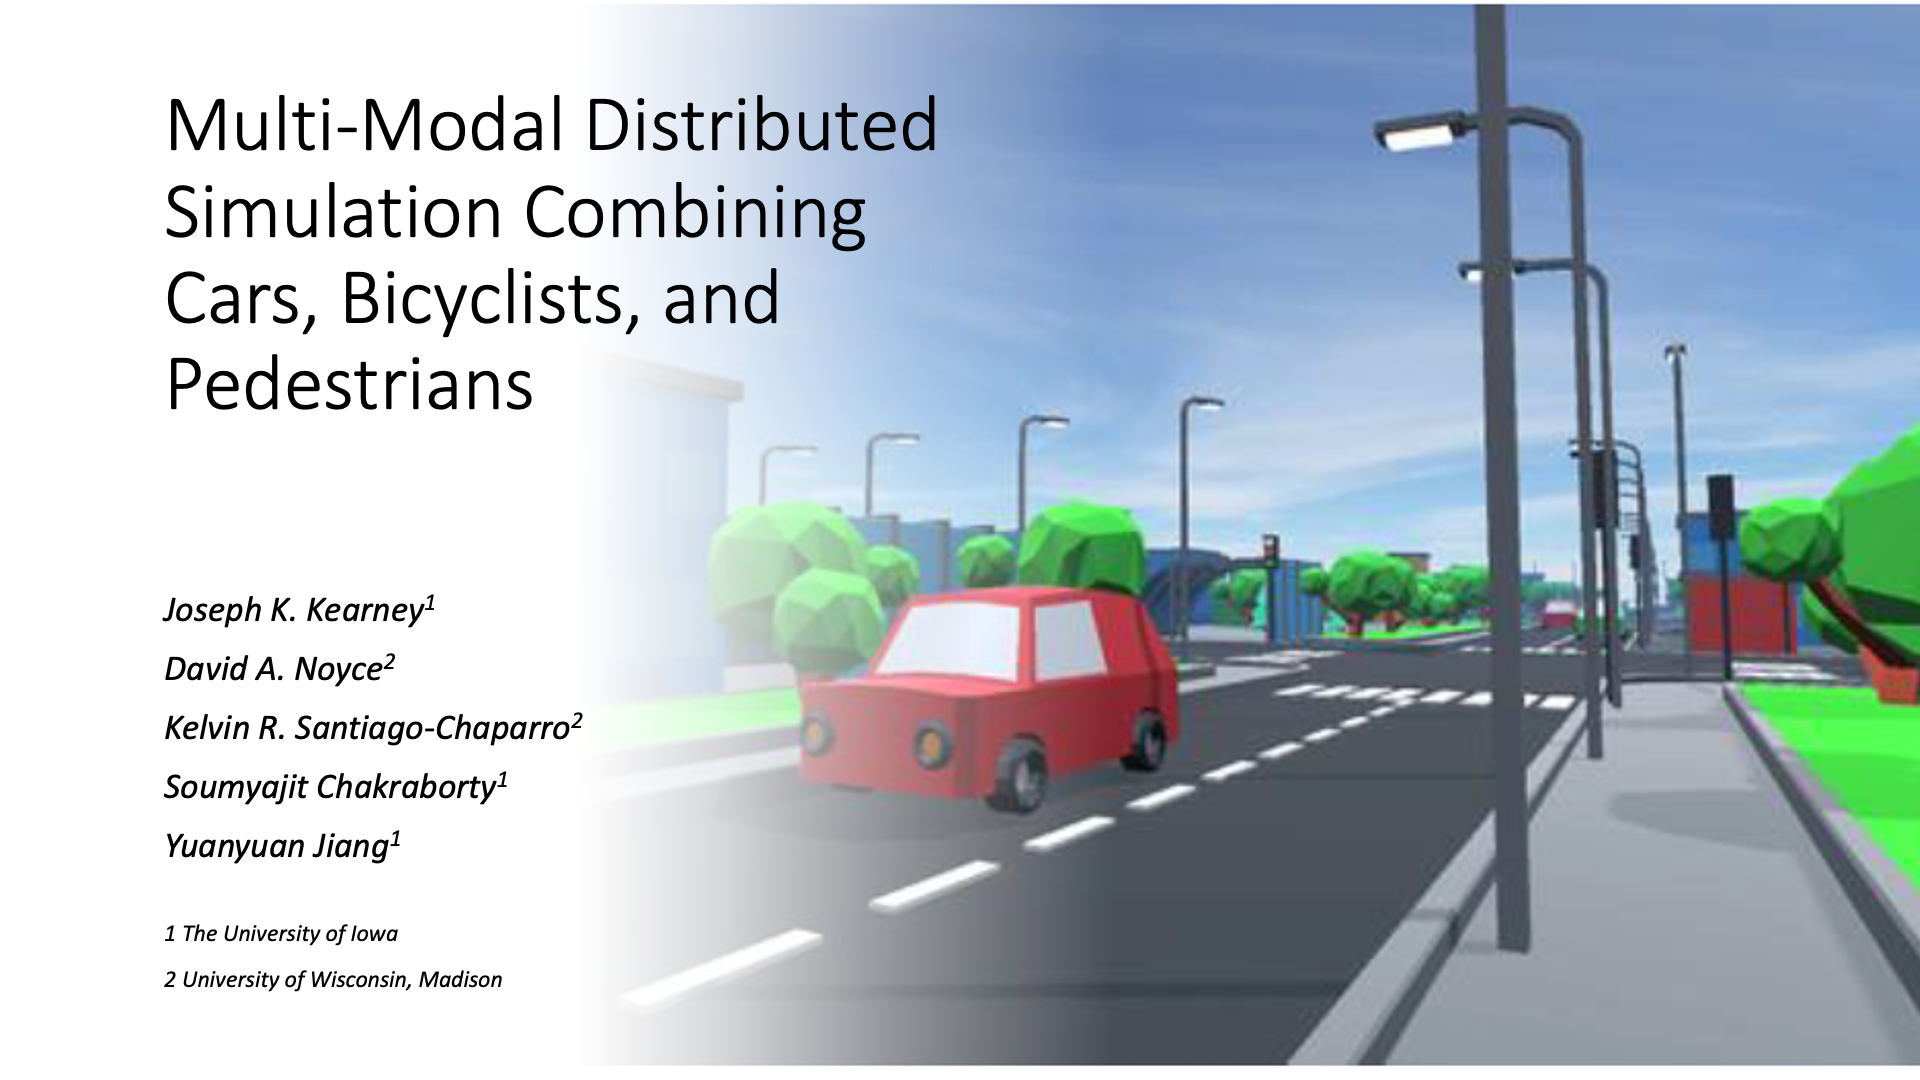 Multi-Modal Distributed Simulation Combining Cars, Bicyclists, and Pedestrians